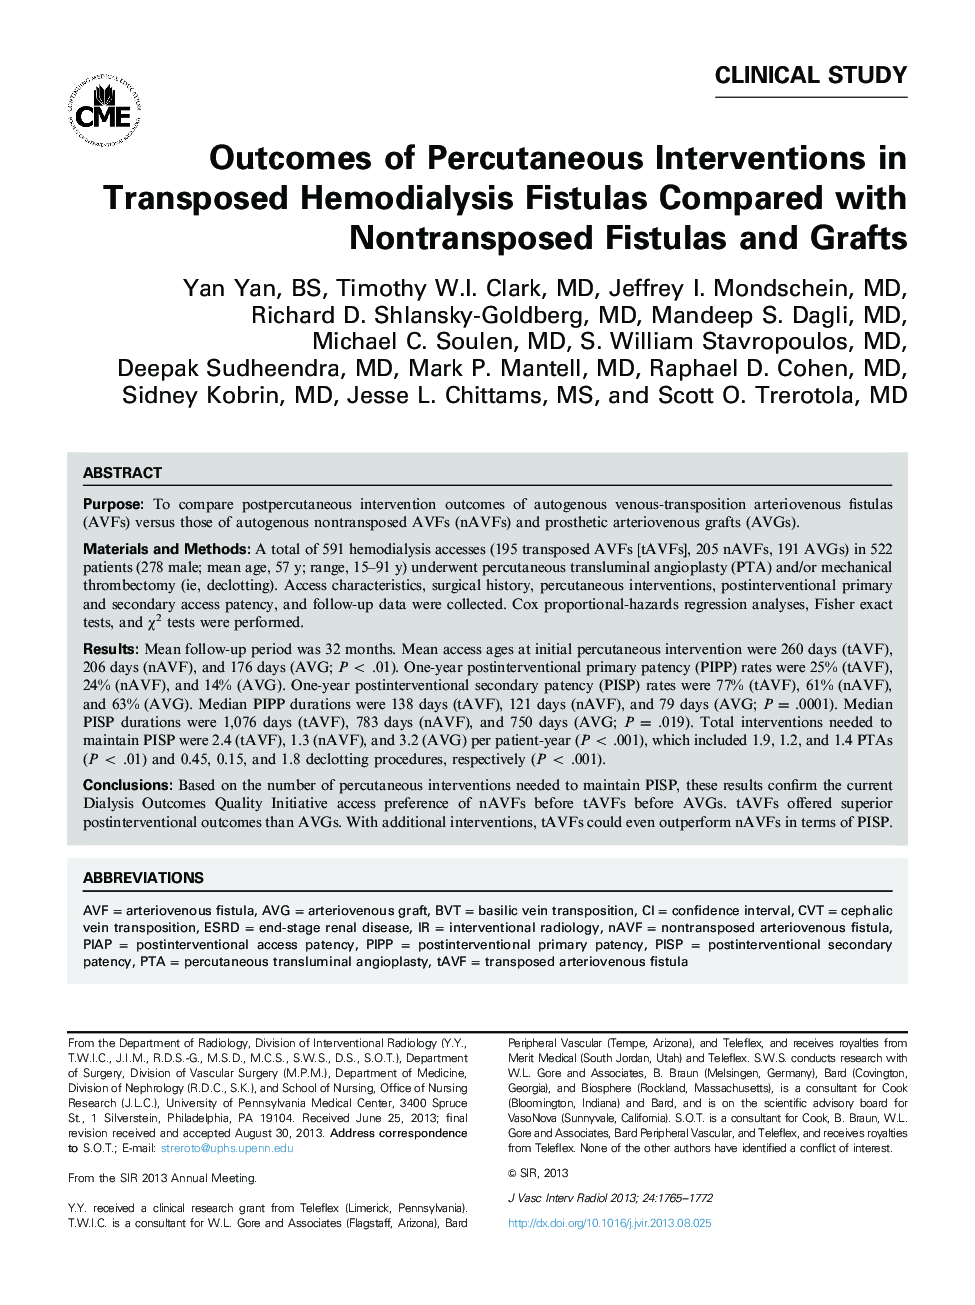 Outcomes of Percutaneous Interventions in Transposed Hemodialysis Fistulas Compared with Nontransposed Fistulas and Grafts